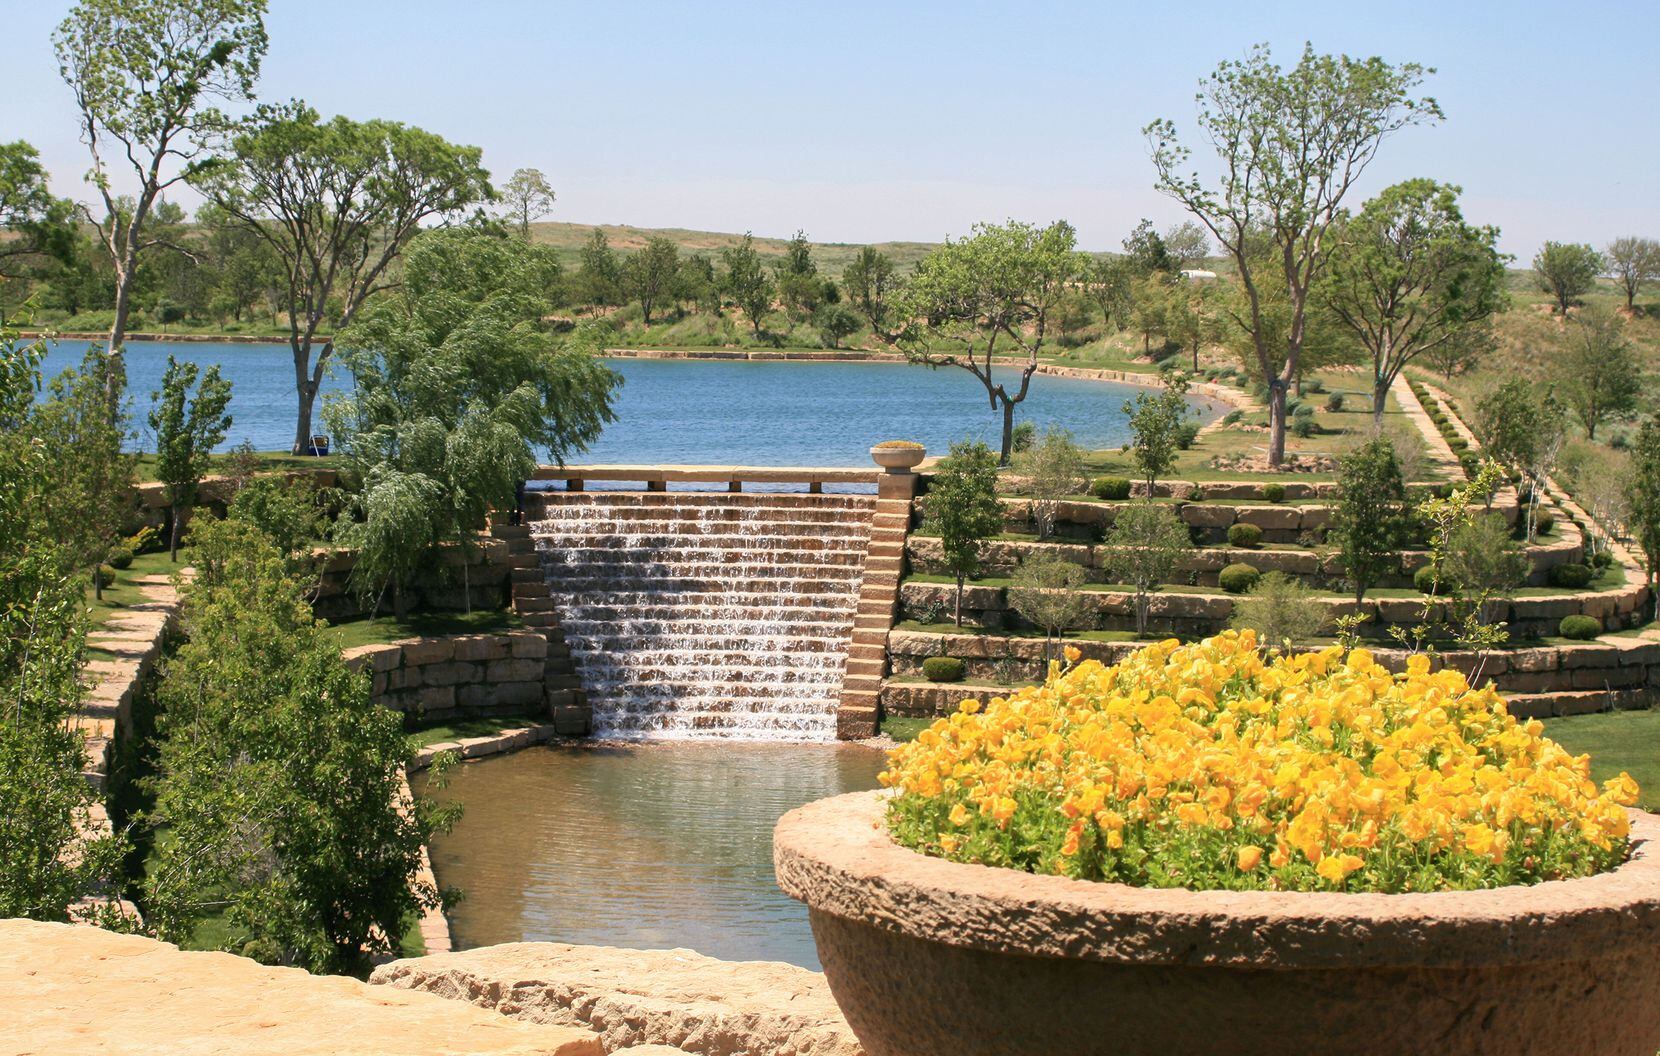 Mesa Vista Ranch boasts roughly 12 miles of water features including waterfalls, lakes,...